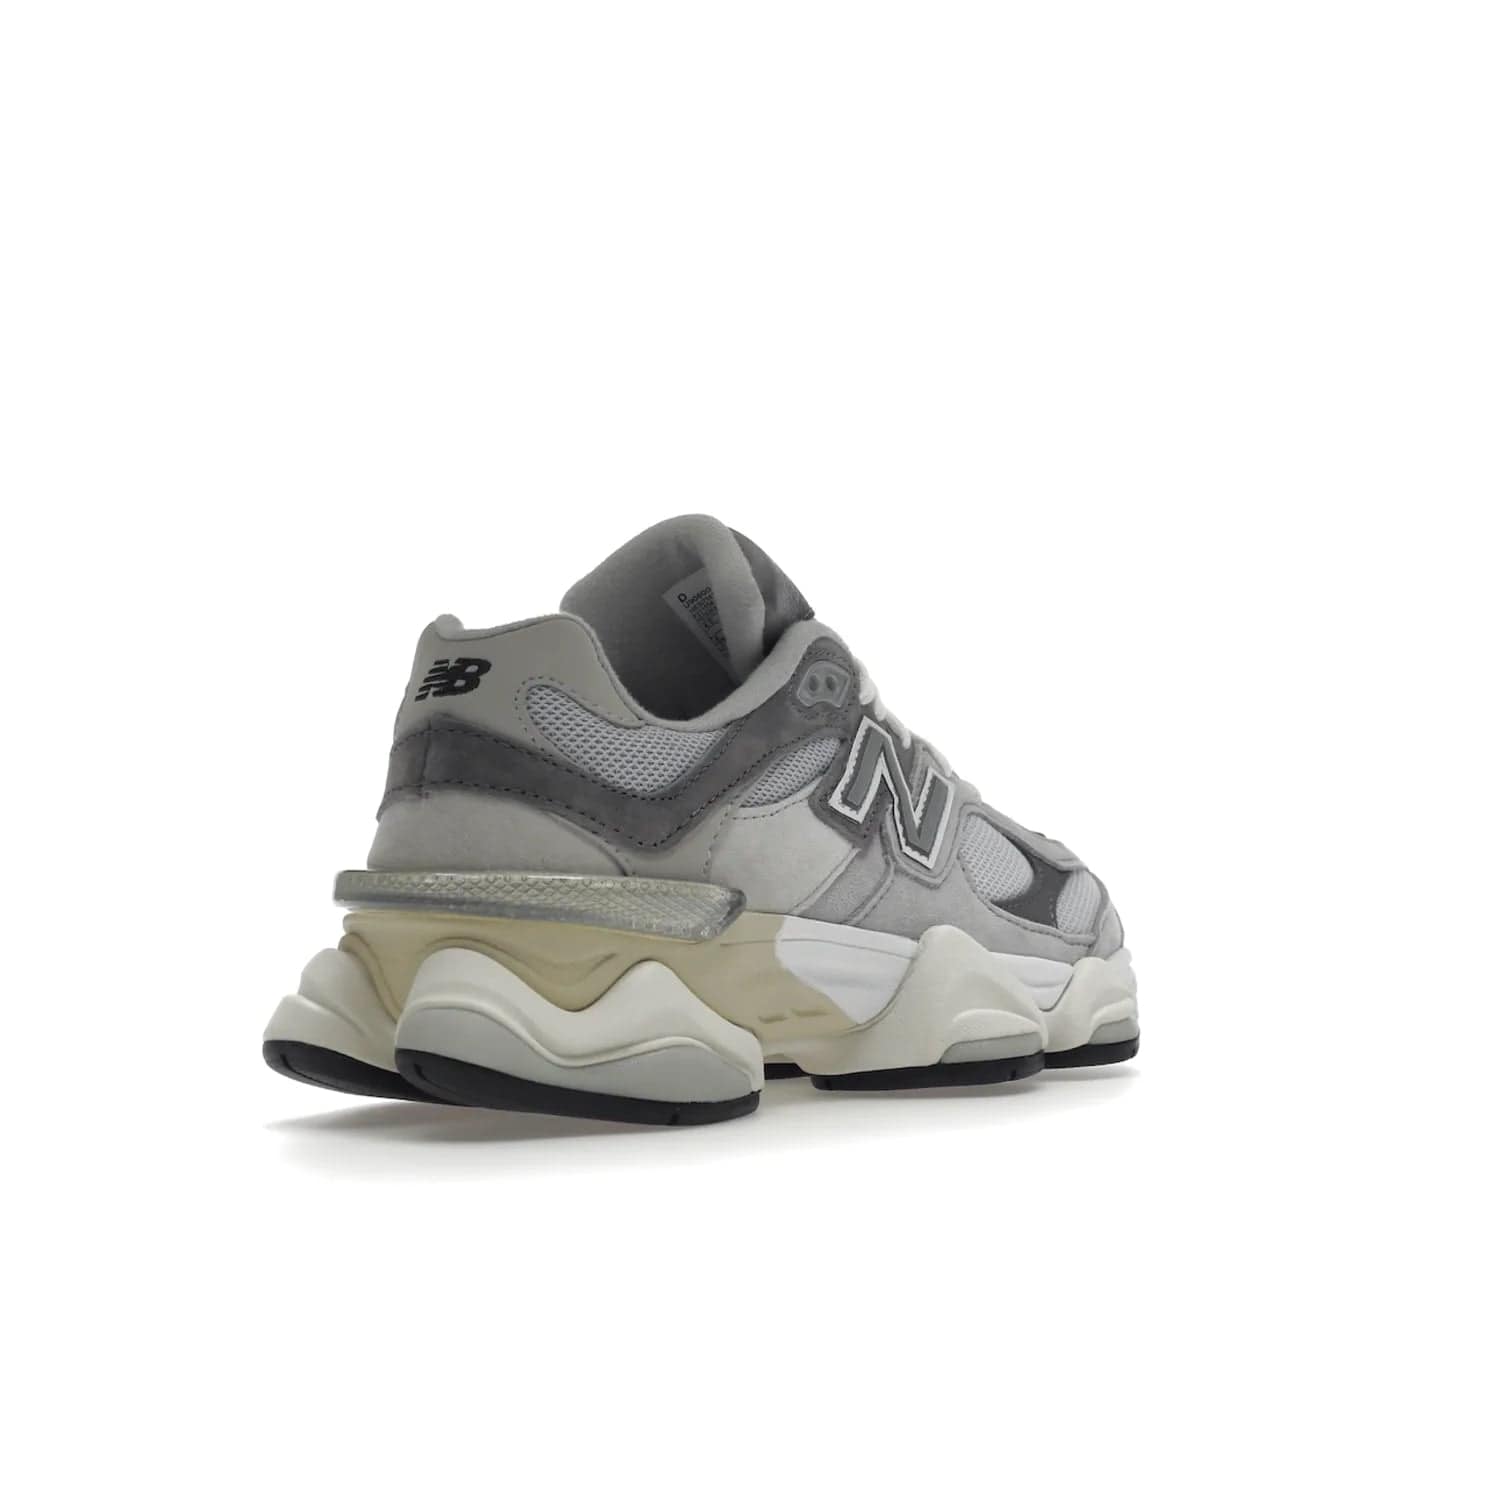 New Balance 9060 Rain Cloud Grey - Image 32 - Only at www.BallersClubKickz.com - New Balance 9060 Rain Cloud Grey is an early 2000s design with grey and off-white tones. Pigskin suede, mesh, and silver accents. "N" emblem and dual-density midsole on diamond outsole. ABZORB technology cushioning. September 2nd release for $150.